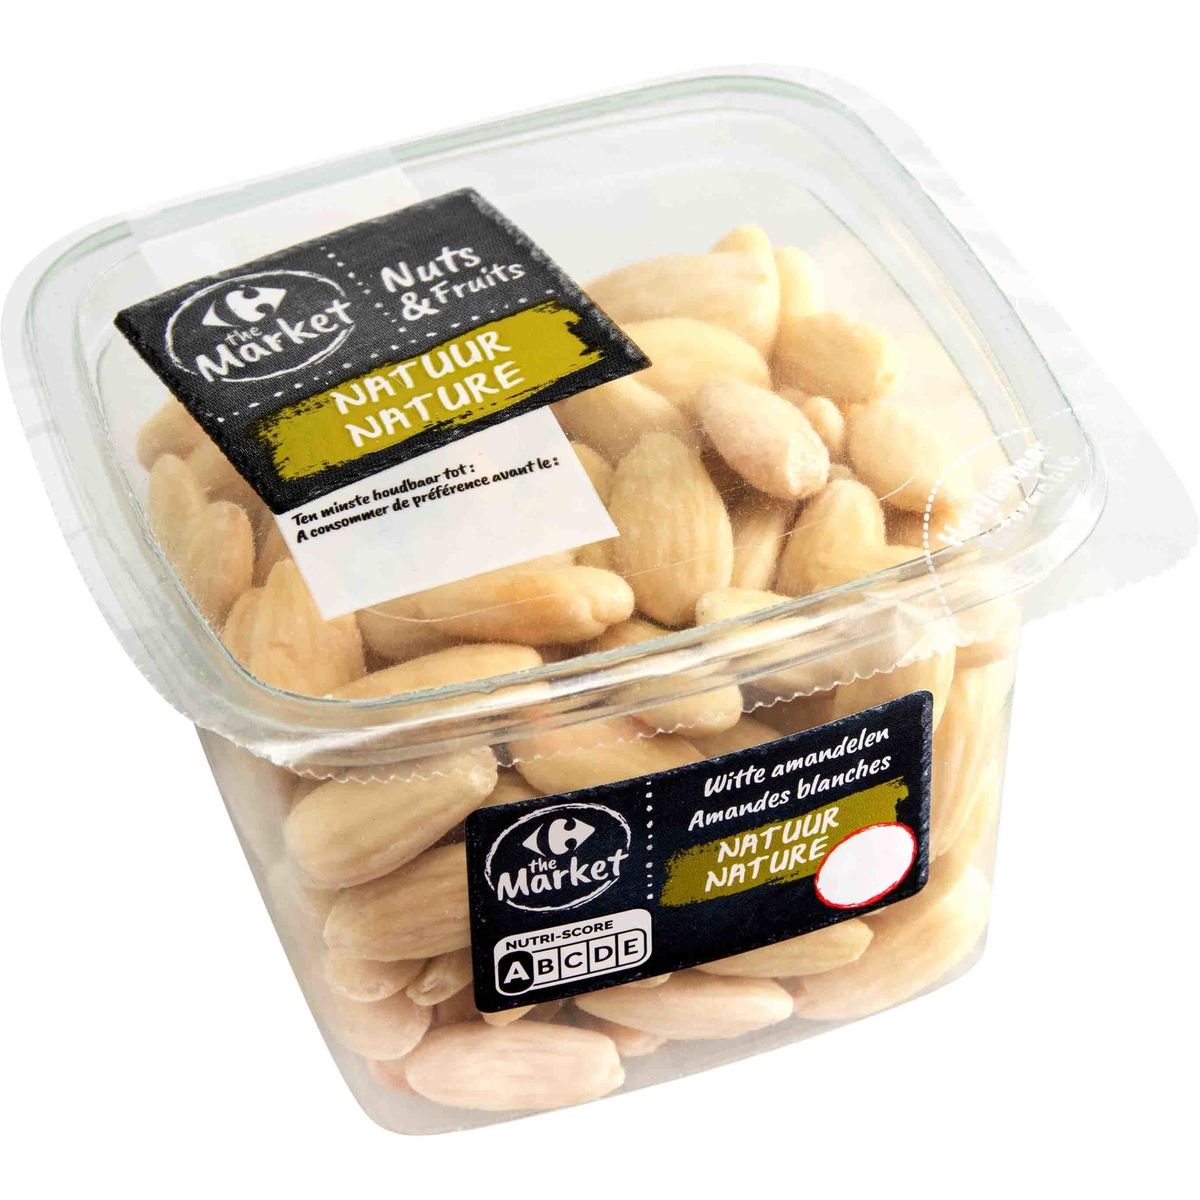 Carrefour The Market Nuts & Fruits Nature Amandes Blanches 200 g